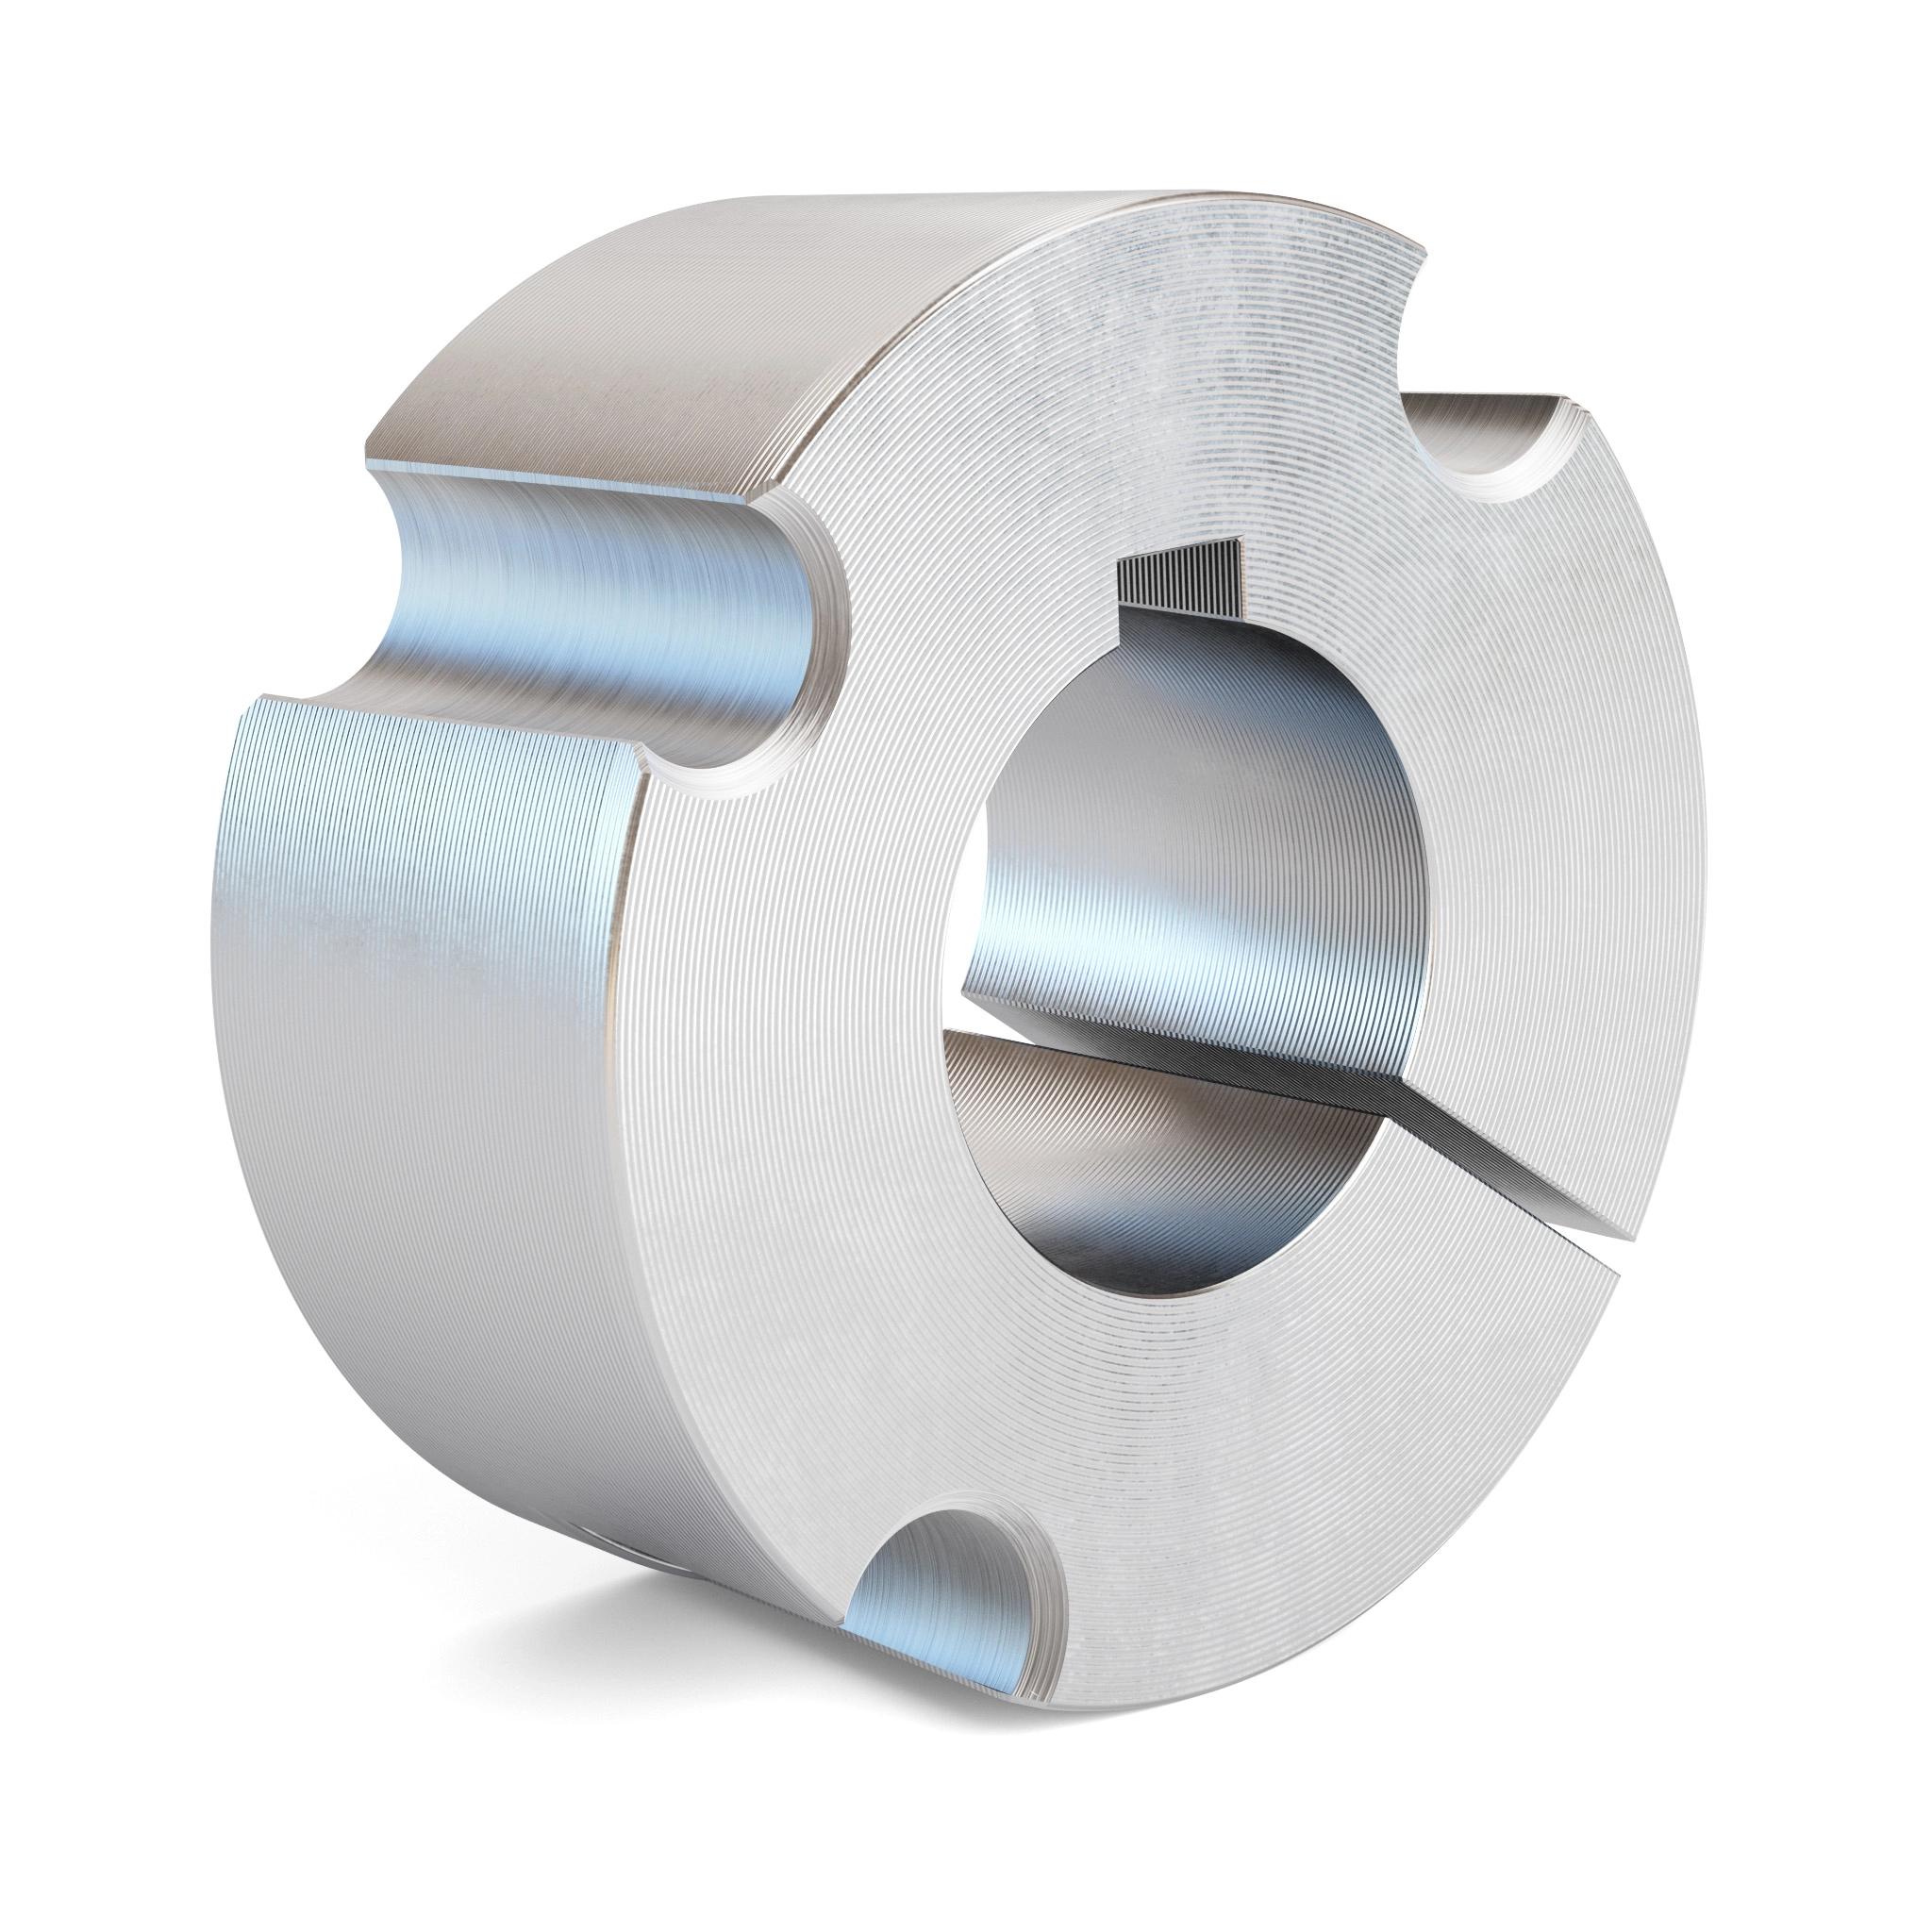 Gates 3535 2.7/8 Taper-Lock Bushings, 3535 2.7/8 BUSH 19 X 10Use with all Taper-Lock® style sheaves, sprockets and pulleys.